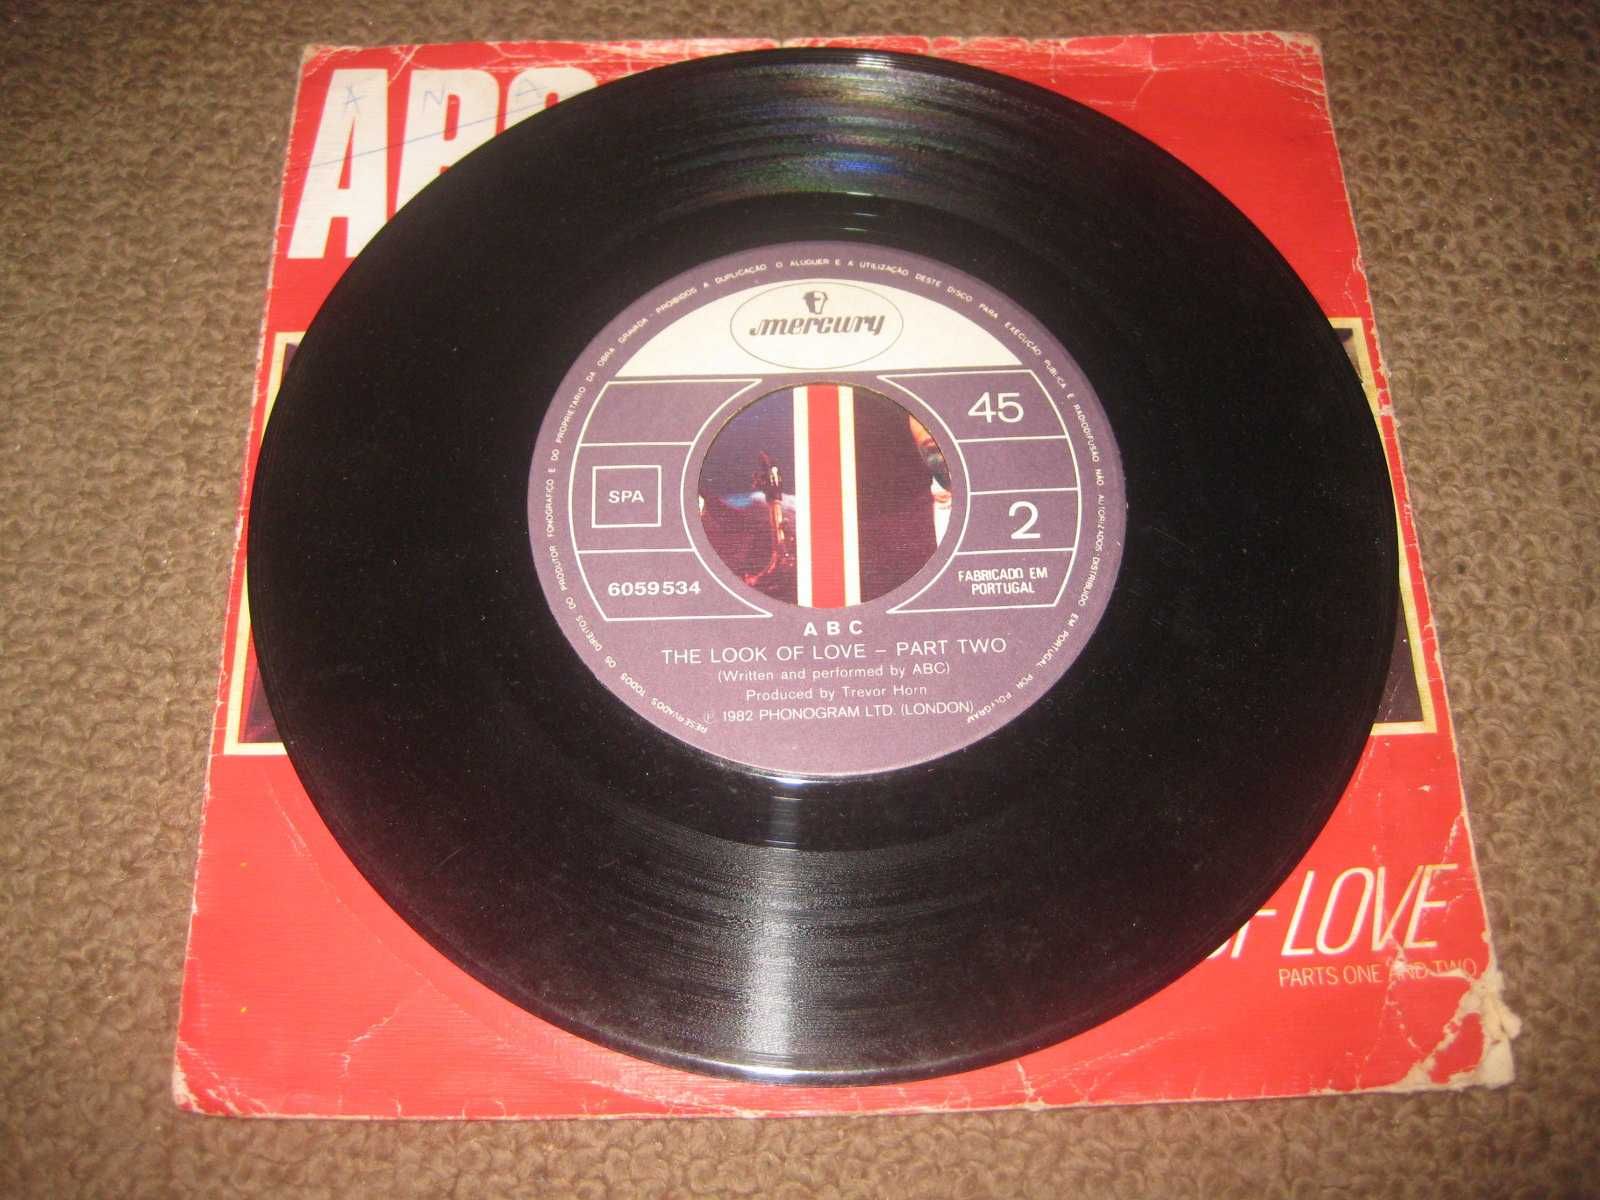 Vinil Single 45 rpm dos ABC "The Look Of Love"